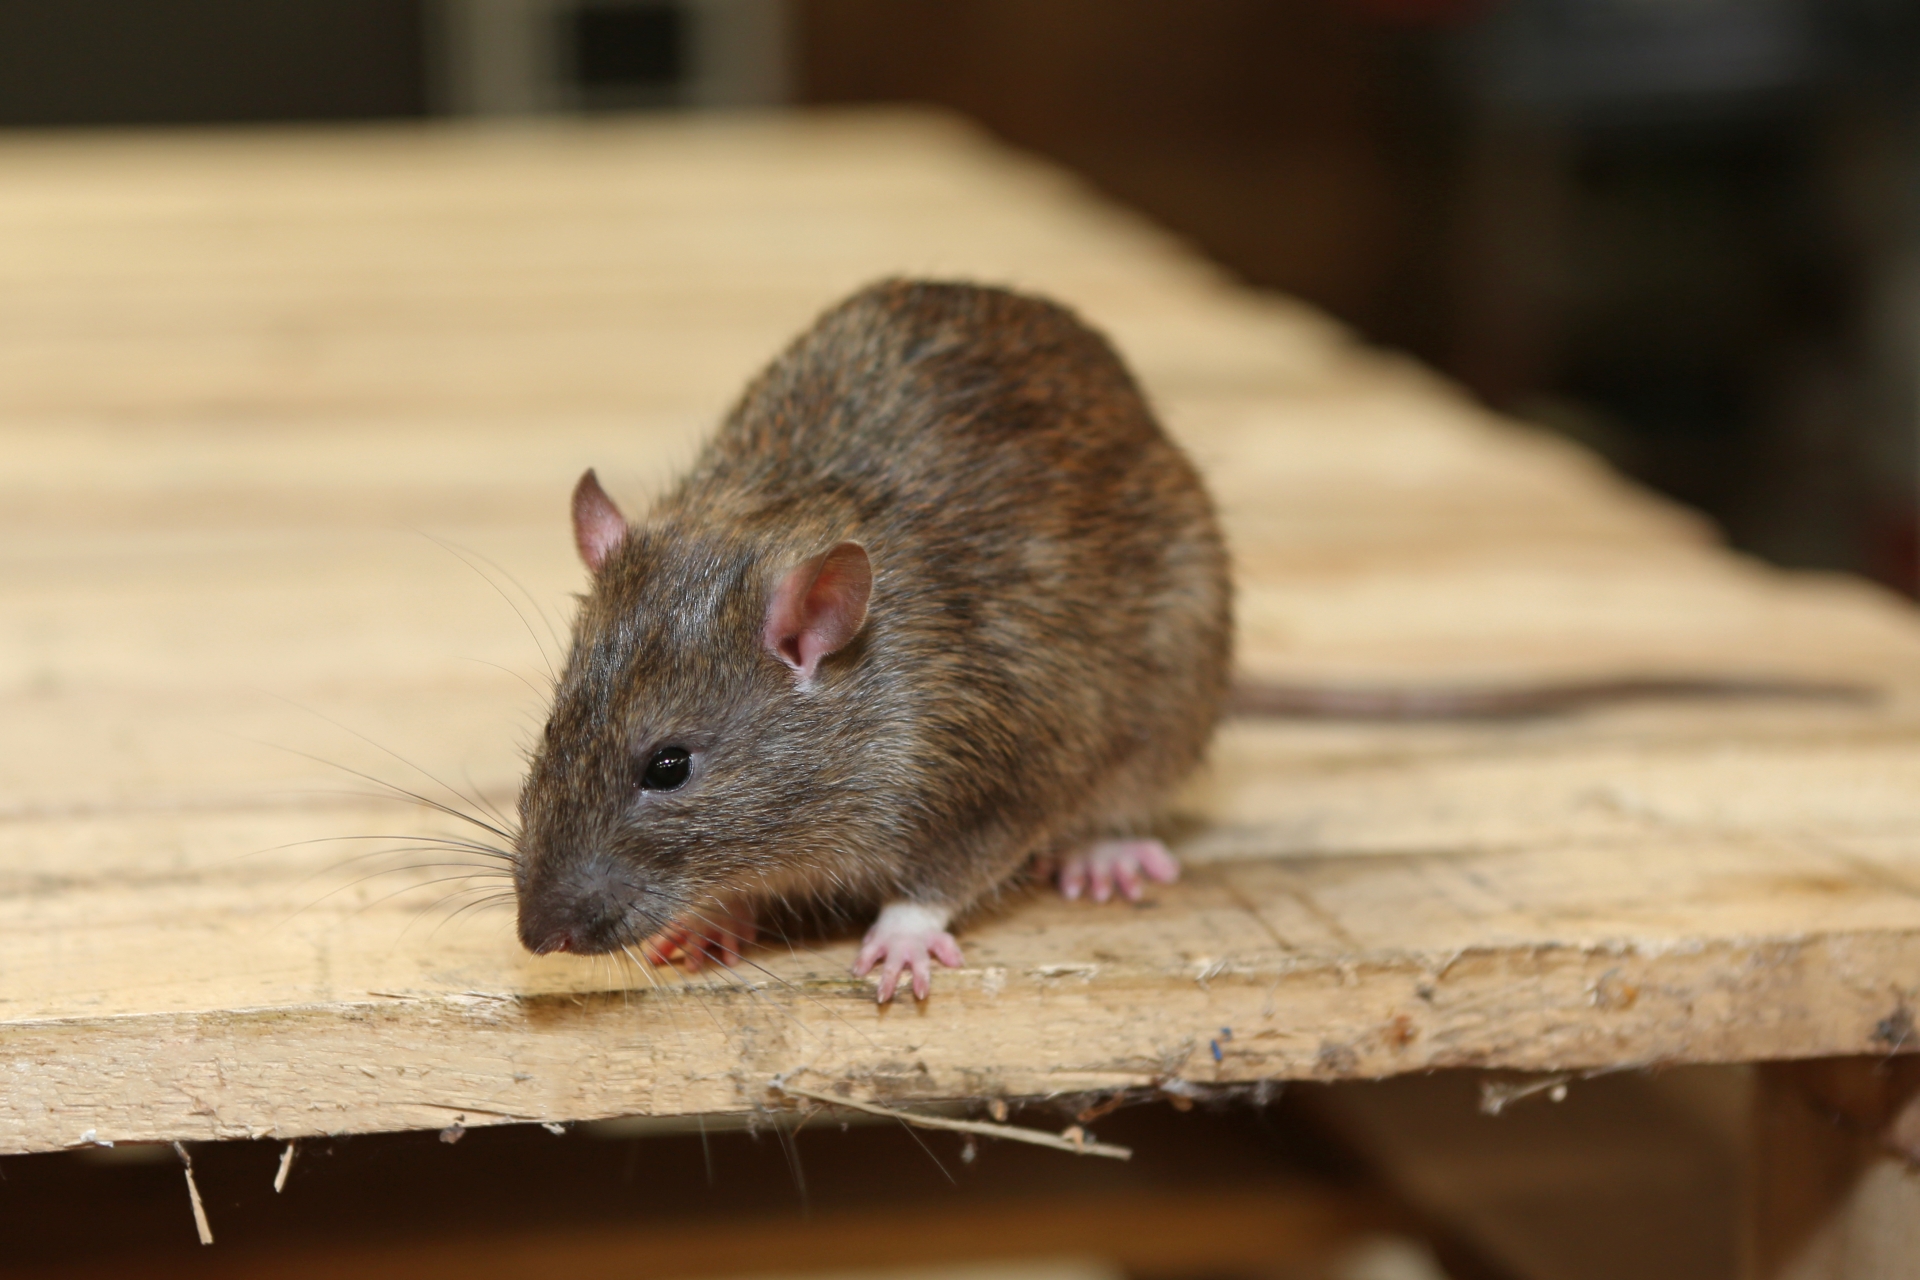 Rat extermination, Pest Control in Tolworth, Berrylands, KT5. Call Now 020 8166 9746